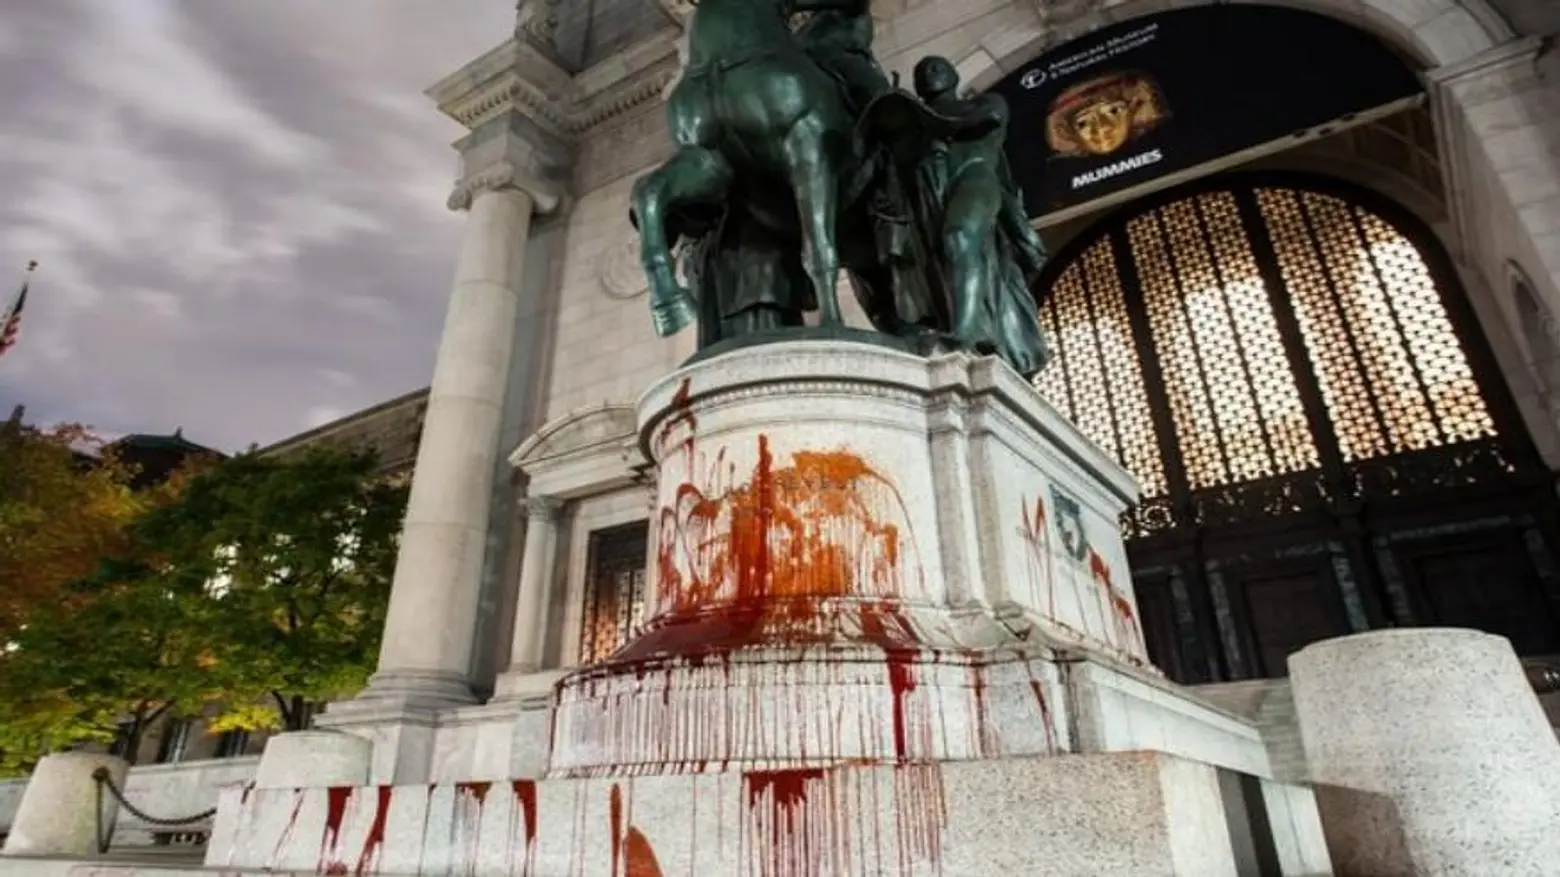 Statue of Teddy Roosevelt outside Natural History Museum vandalized with red paint